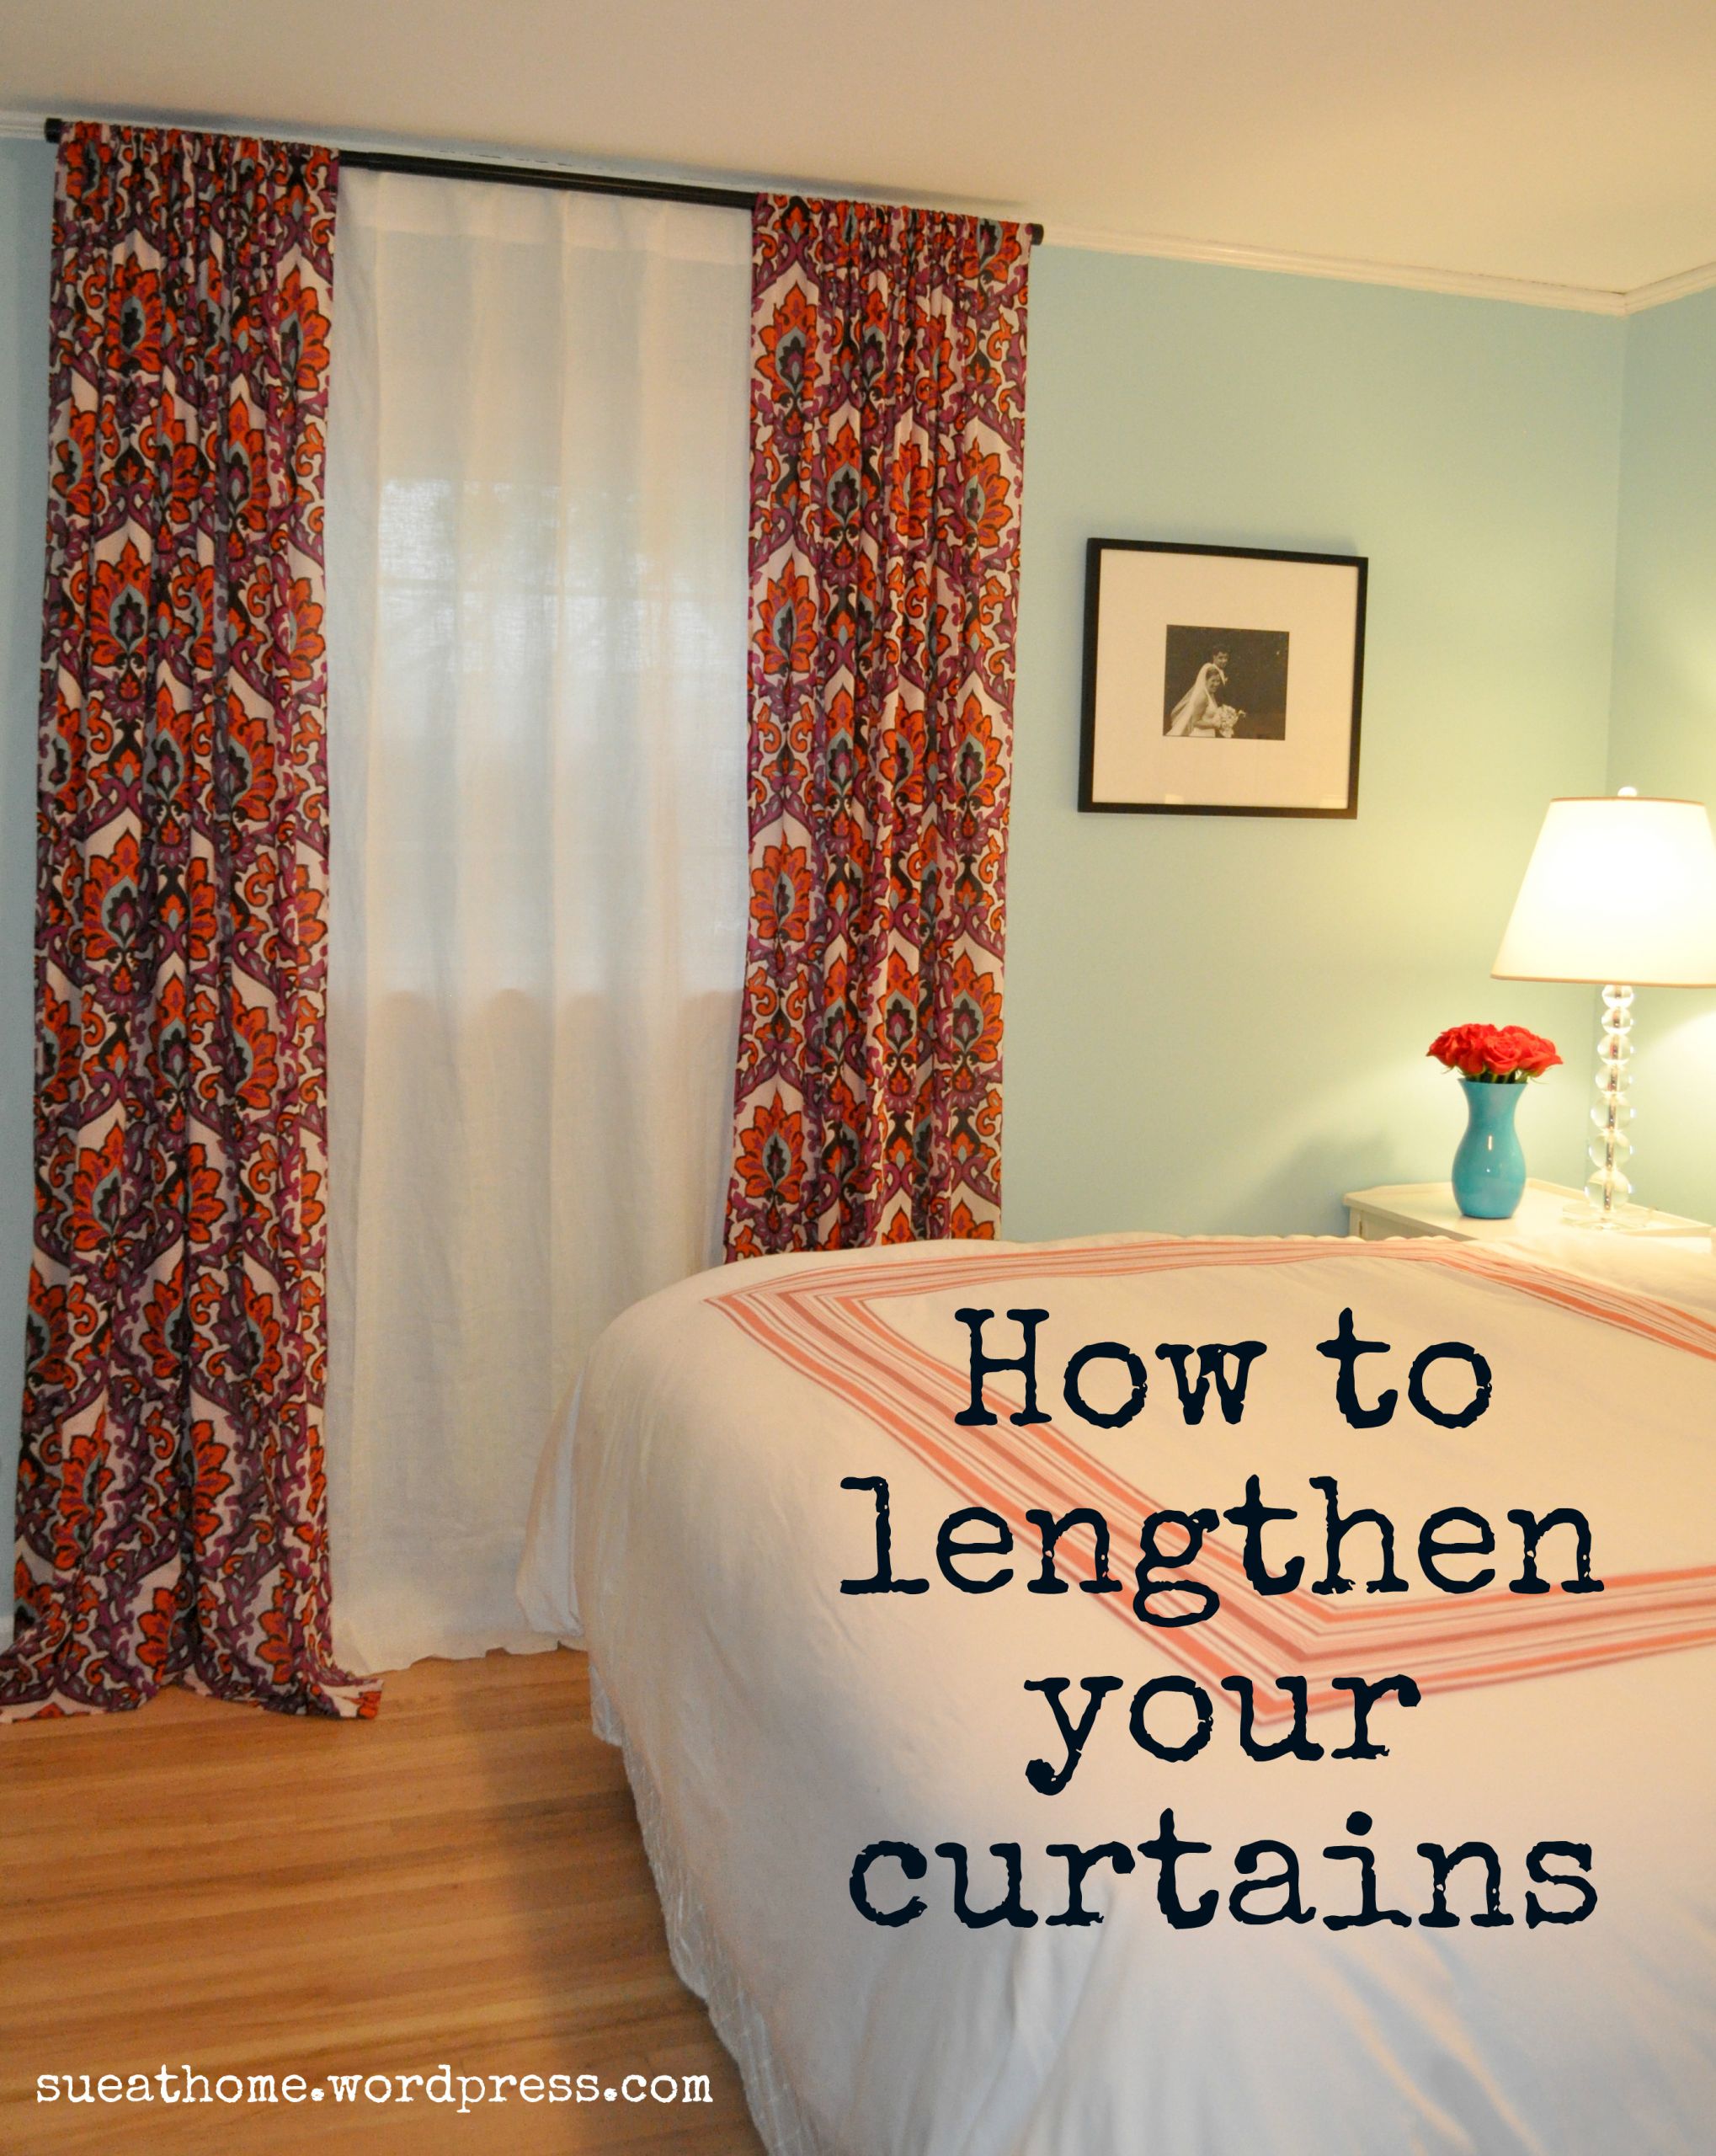 Master Bedroom Curtains
 DIY Lengthening our Master Bedroom Curtains – Sue At Home